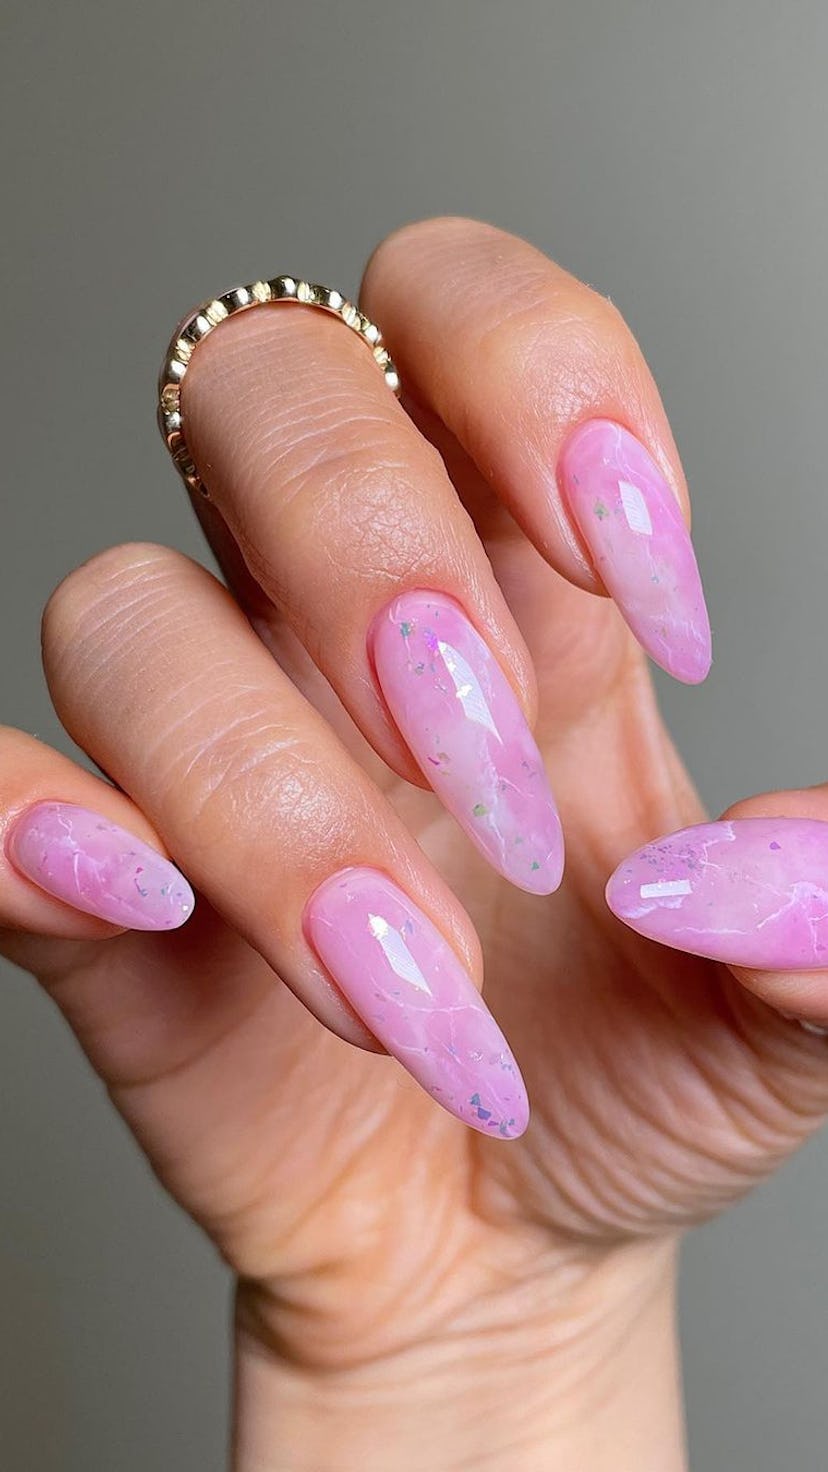 Pink marble nails are a cute pink nail design for Valentine's Day 2023.